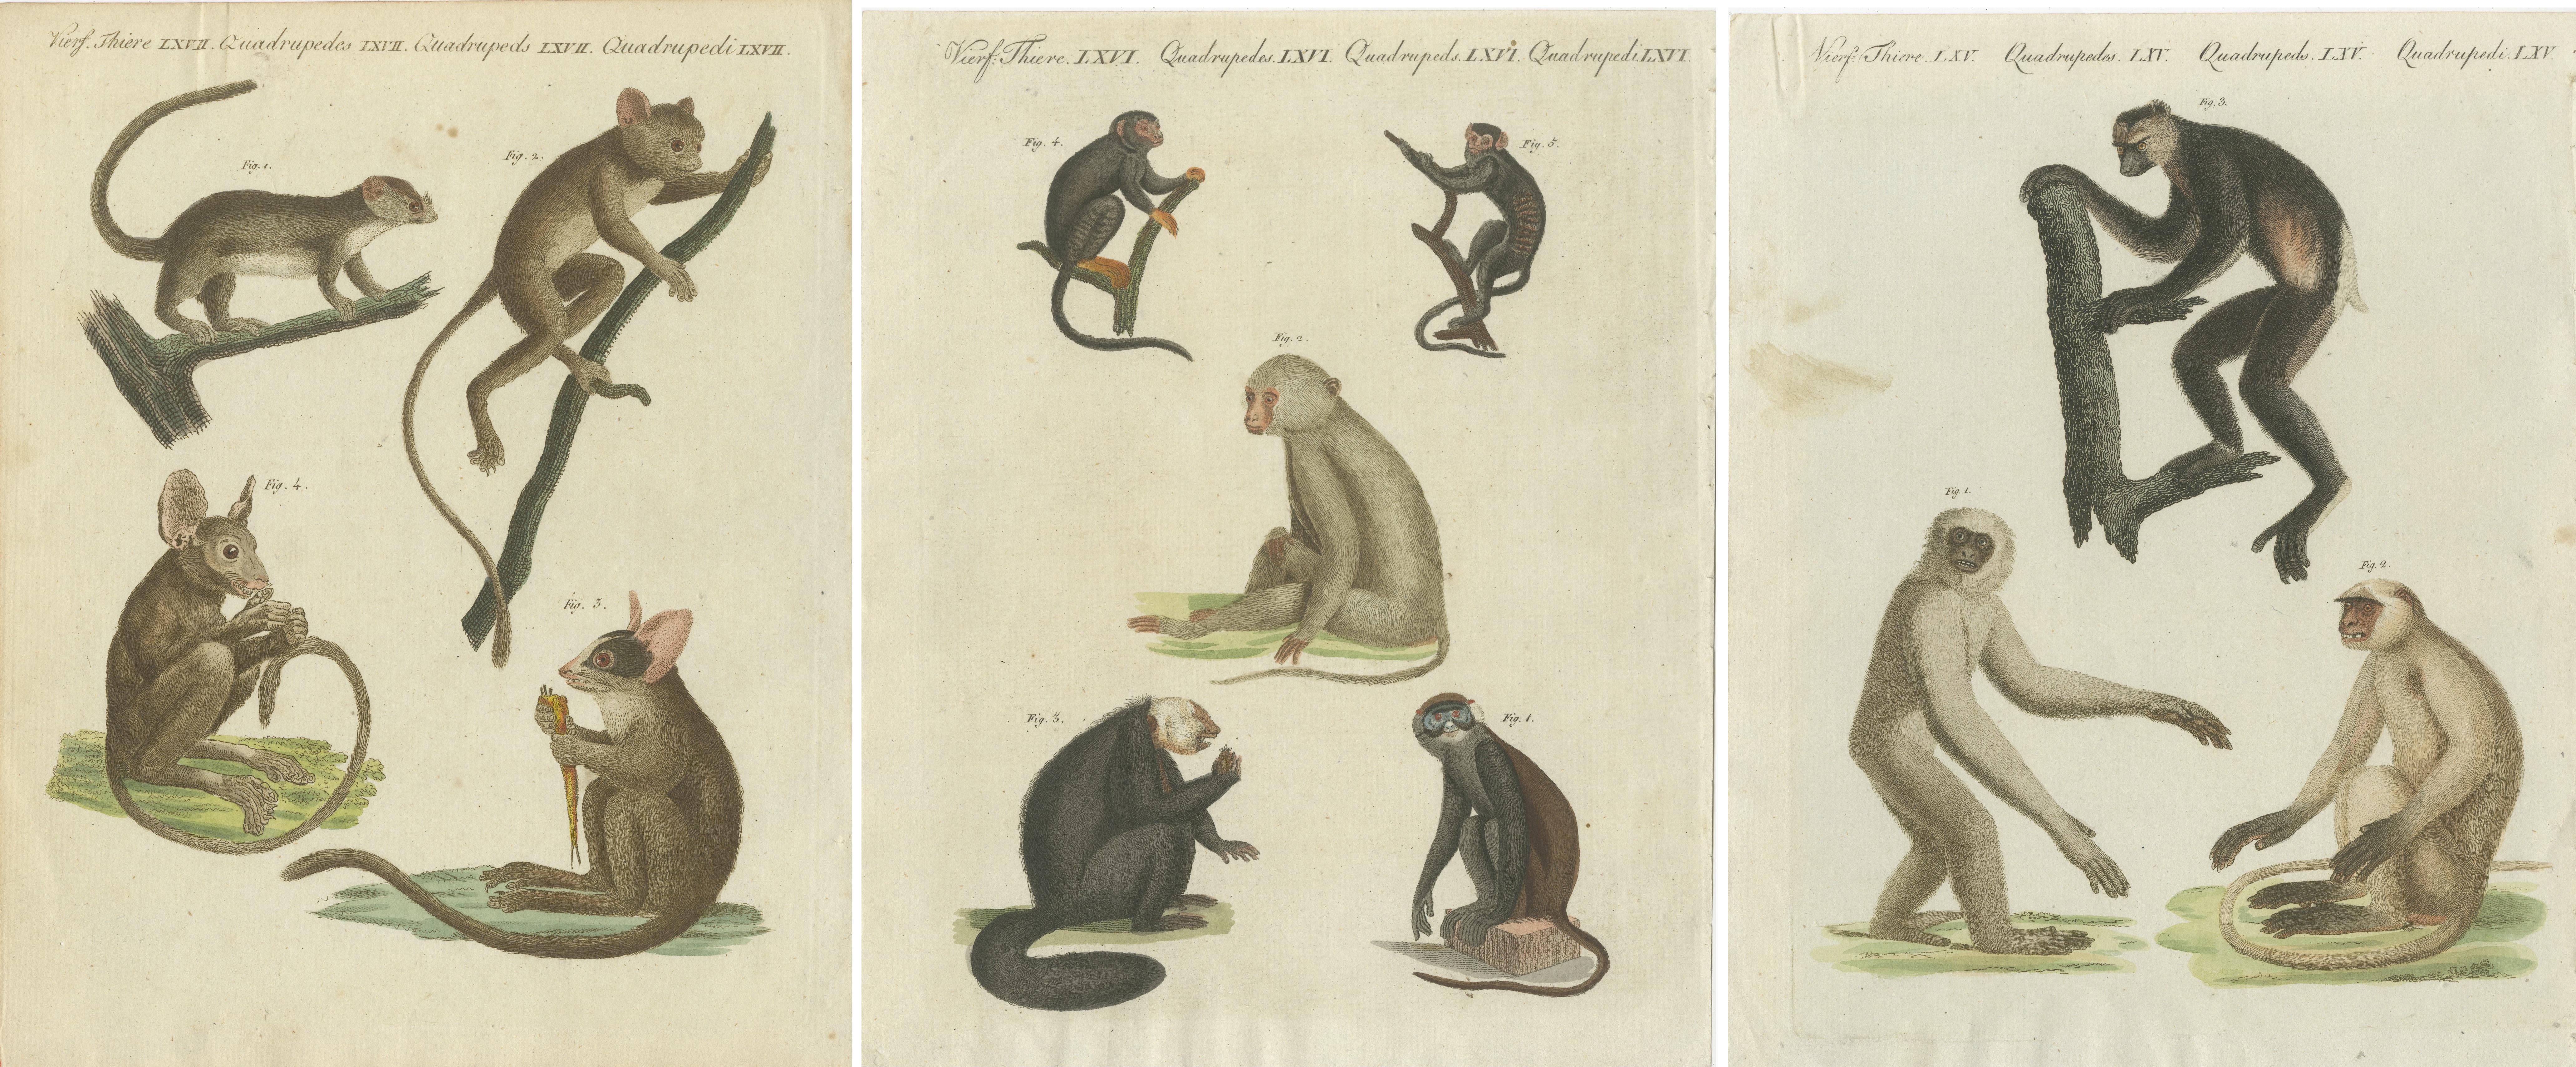 Set of three original antique prints of various monkeys including maki, indri and others. These prints originate from 'Bilderbuch fur Kinder' by F.J. Bertuch. Friedrich Johann Bertuch (1747-1822) was a German publisher and man of arts most famous